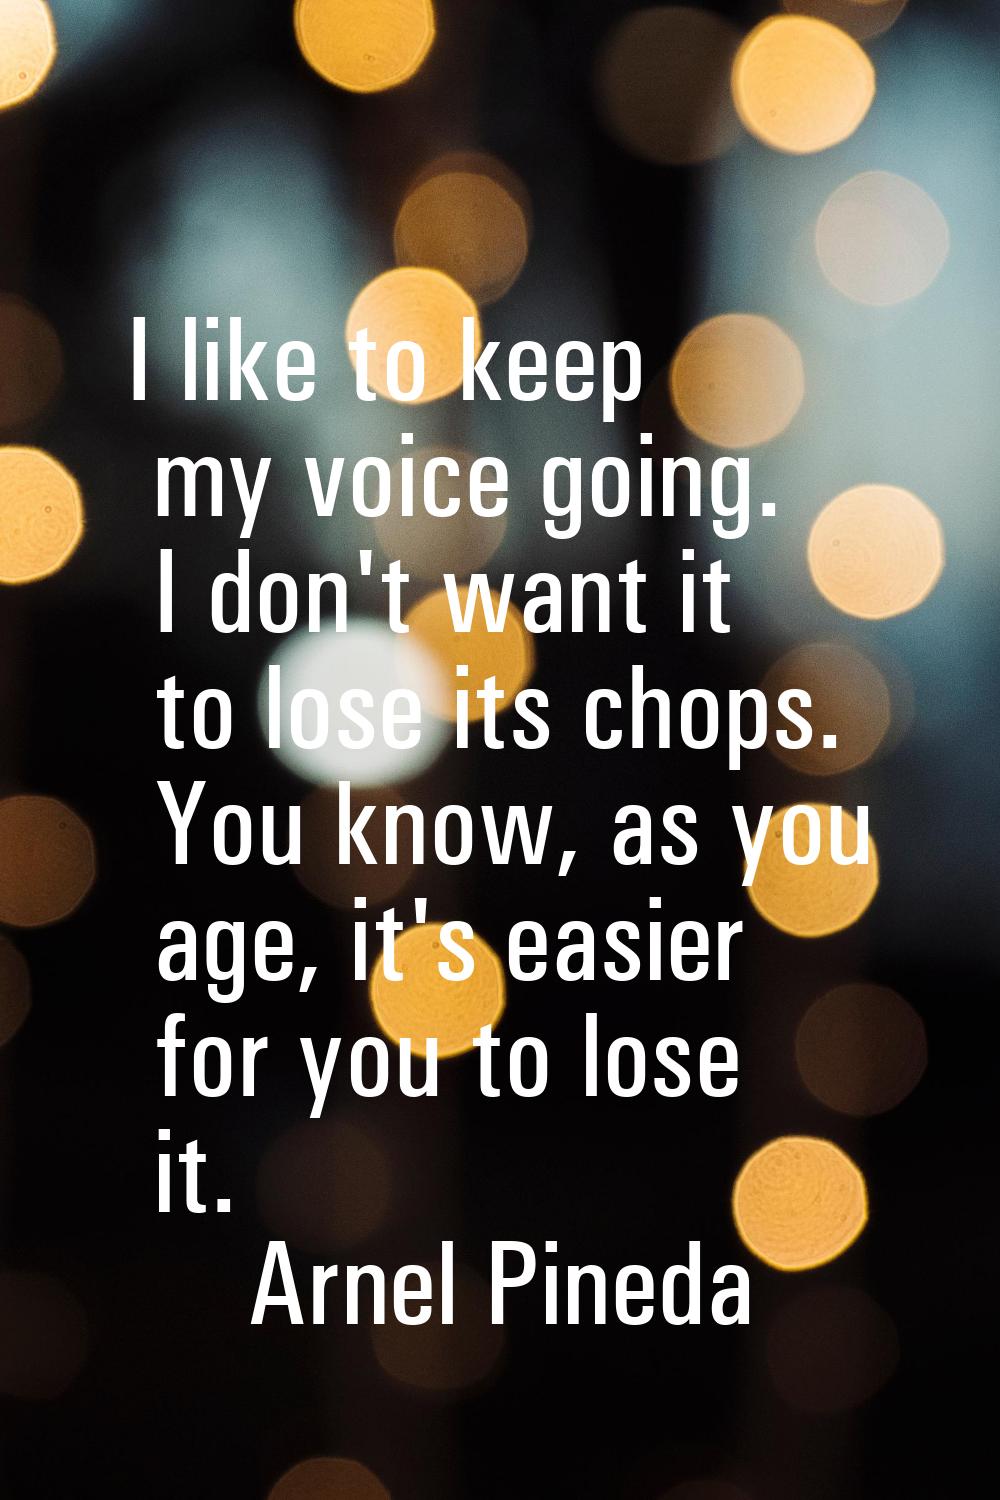 I like to keep my voice going. I don't want it to lose its chops. You know, as you age, it's easier